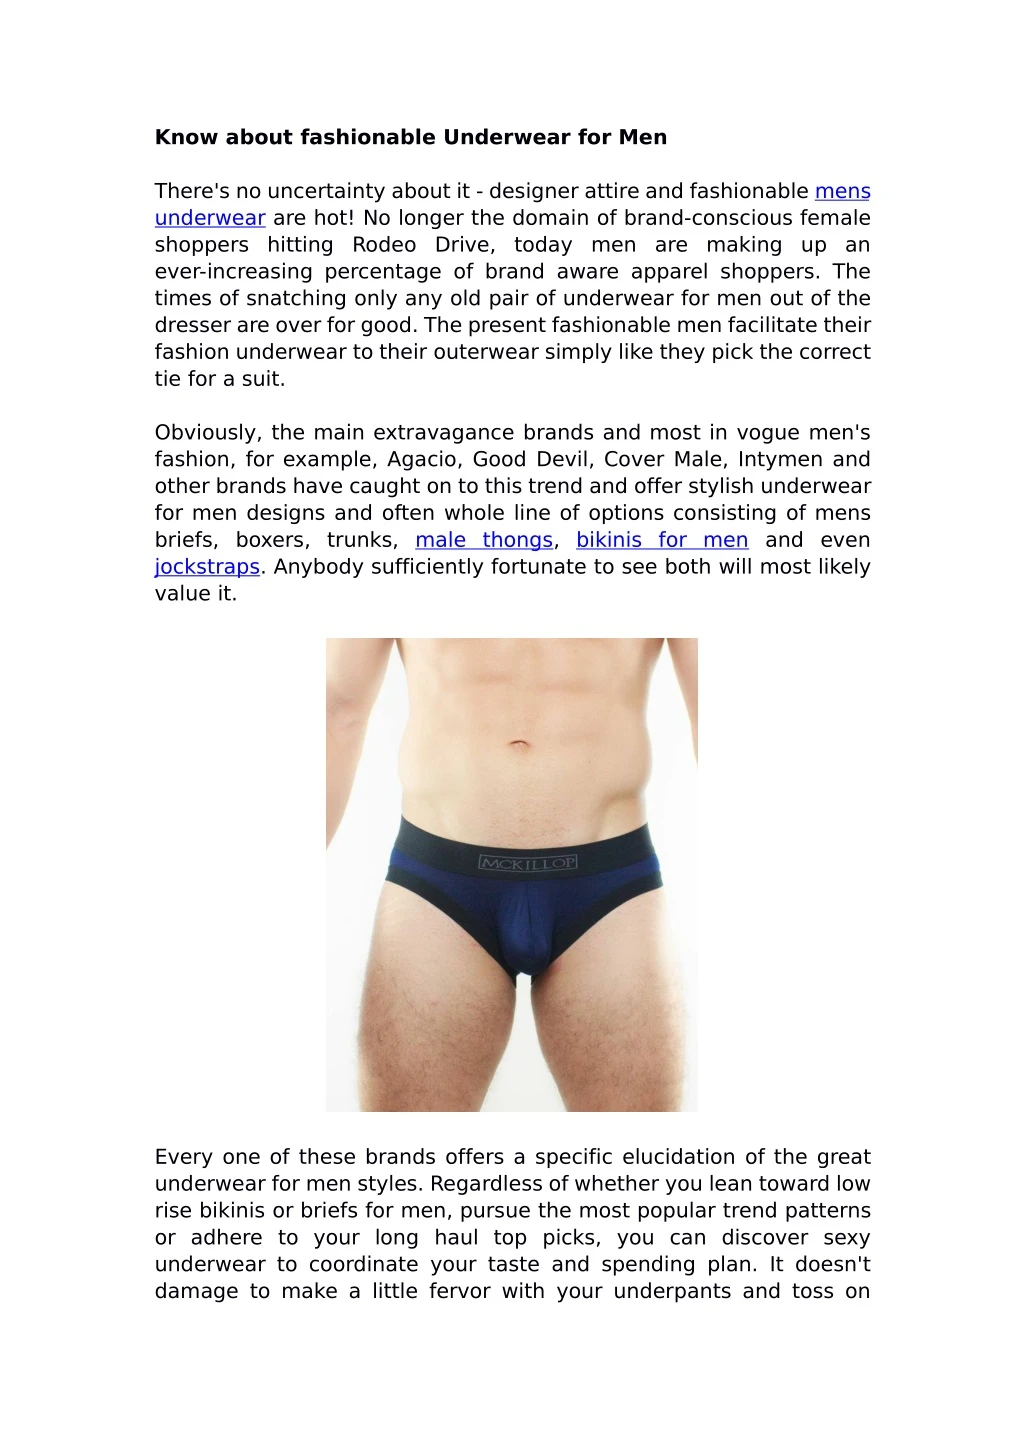 know about fashionable underwear for men